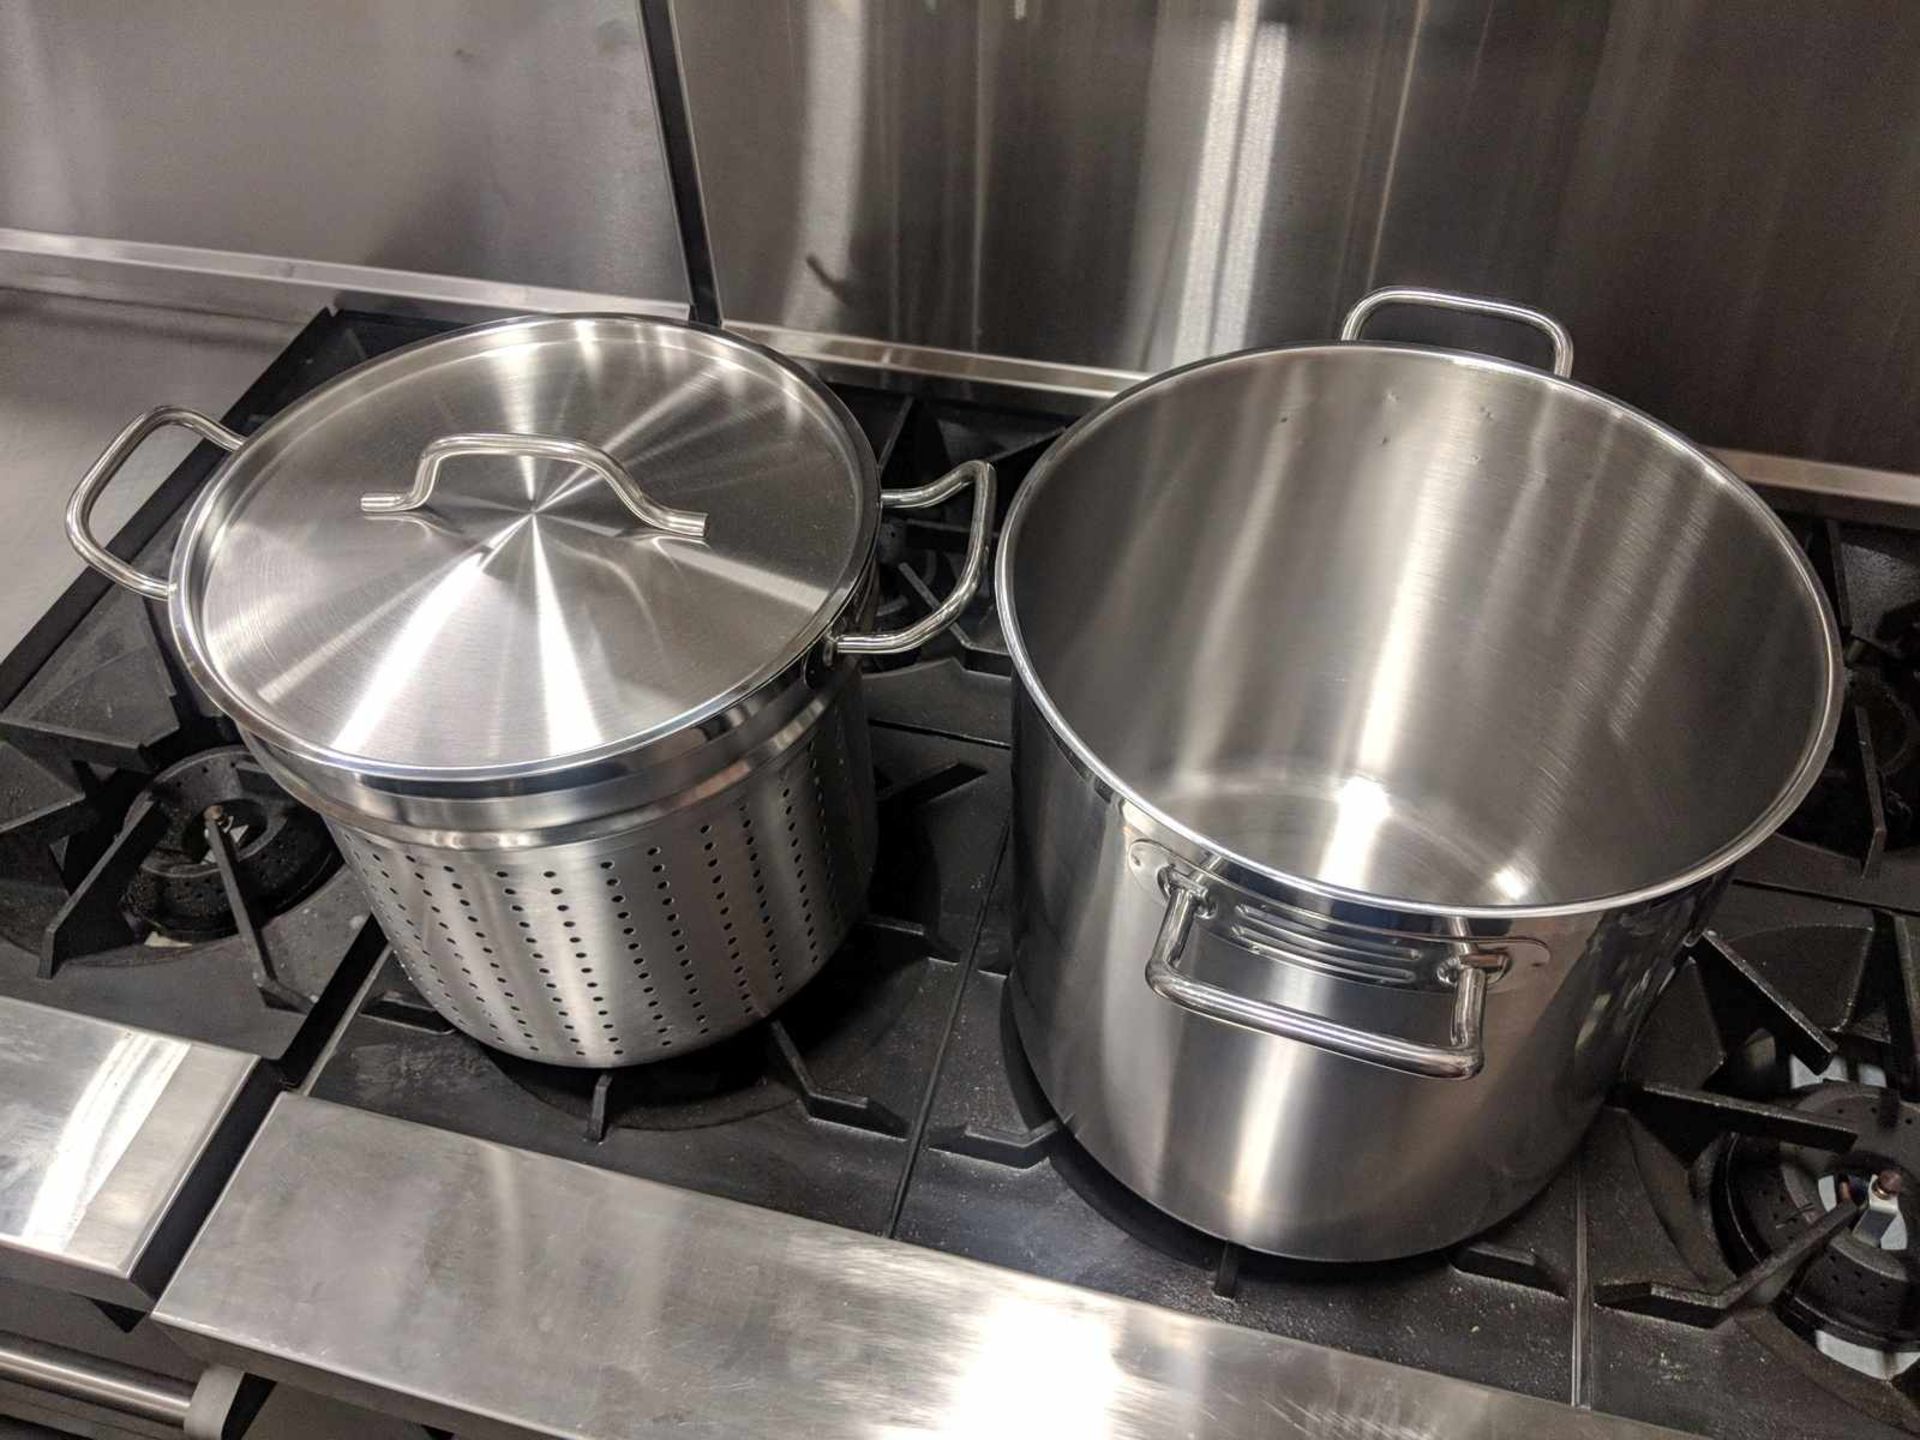 20qt Heavy Duty Stainless Stock Pot with Steamer Basket - Image 2 of 2